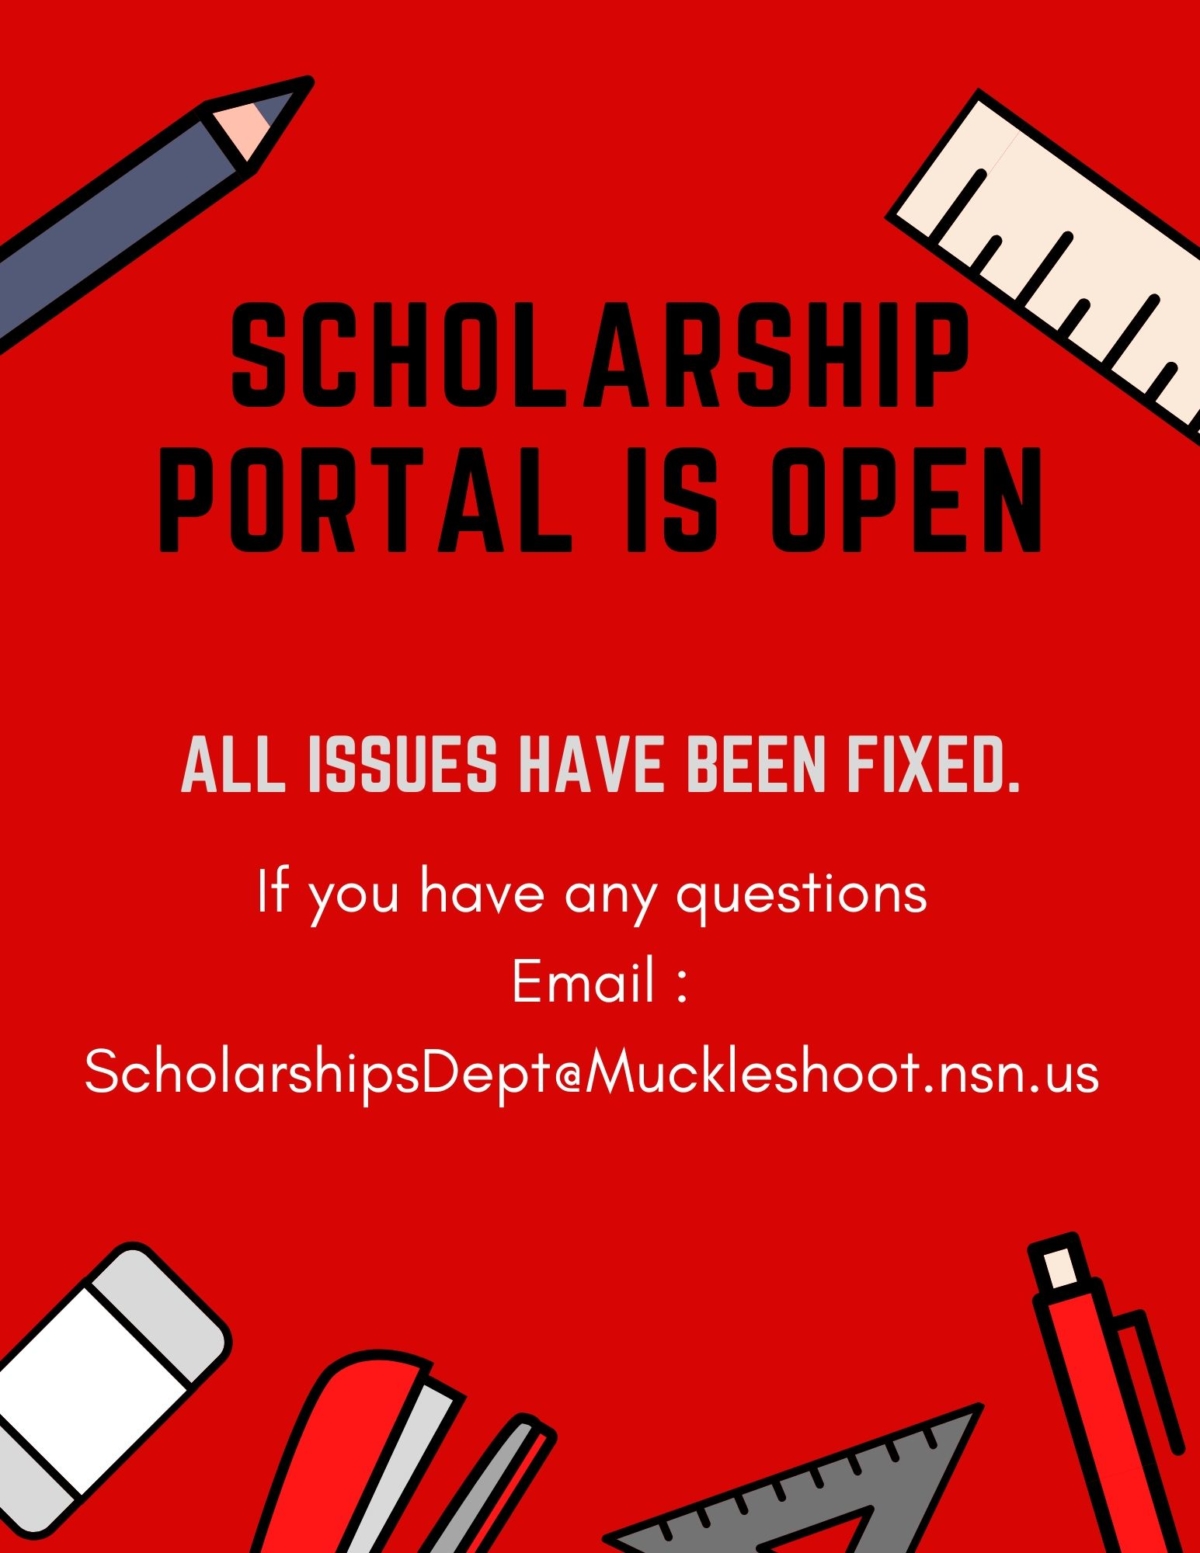 The scholarship portal is back open! – Muckleshoot Adult & Higher Education